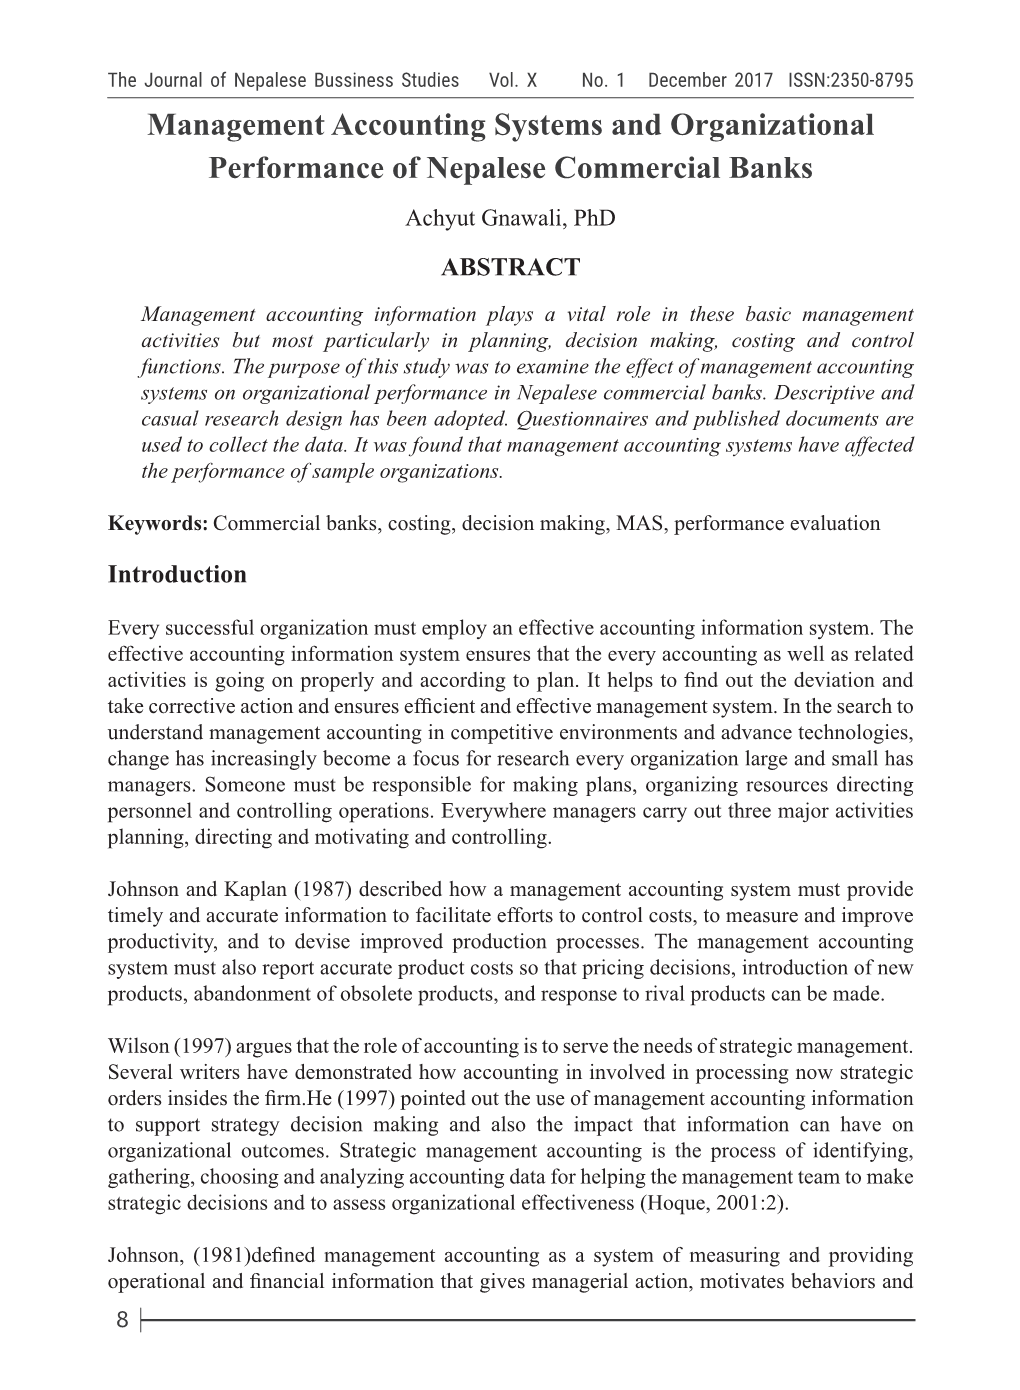 Management Accounting Systems and Organizational Performance of Nepalese Commercial Banks Achyut Gnawali, Phd ABSTRACT